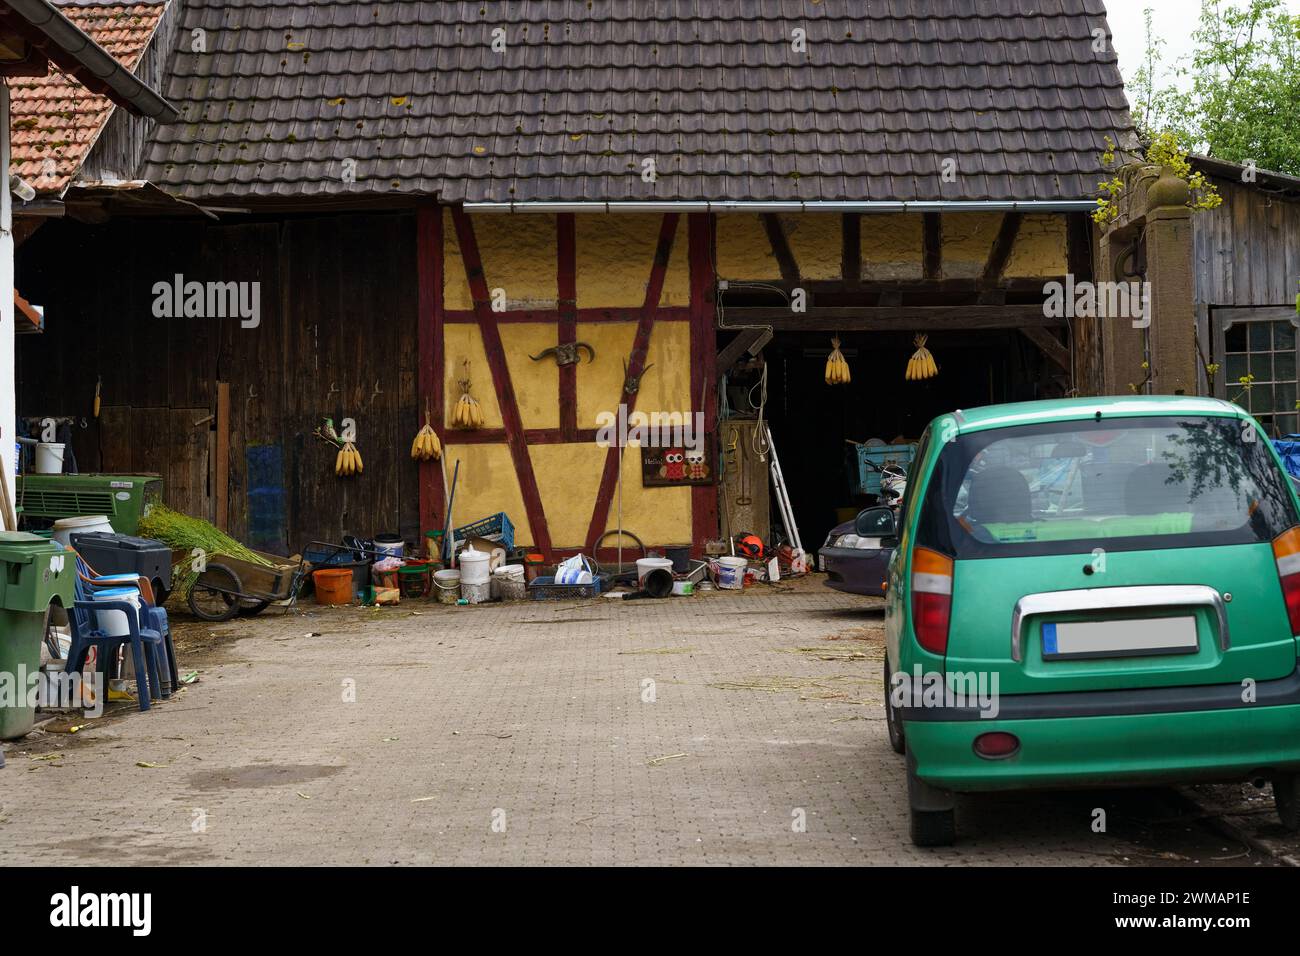 A green car is parked in front of an open rustic farmhouse garage revealing a cluttered interior, with various tools, buckets, and equipment scattered Stock Photo